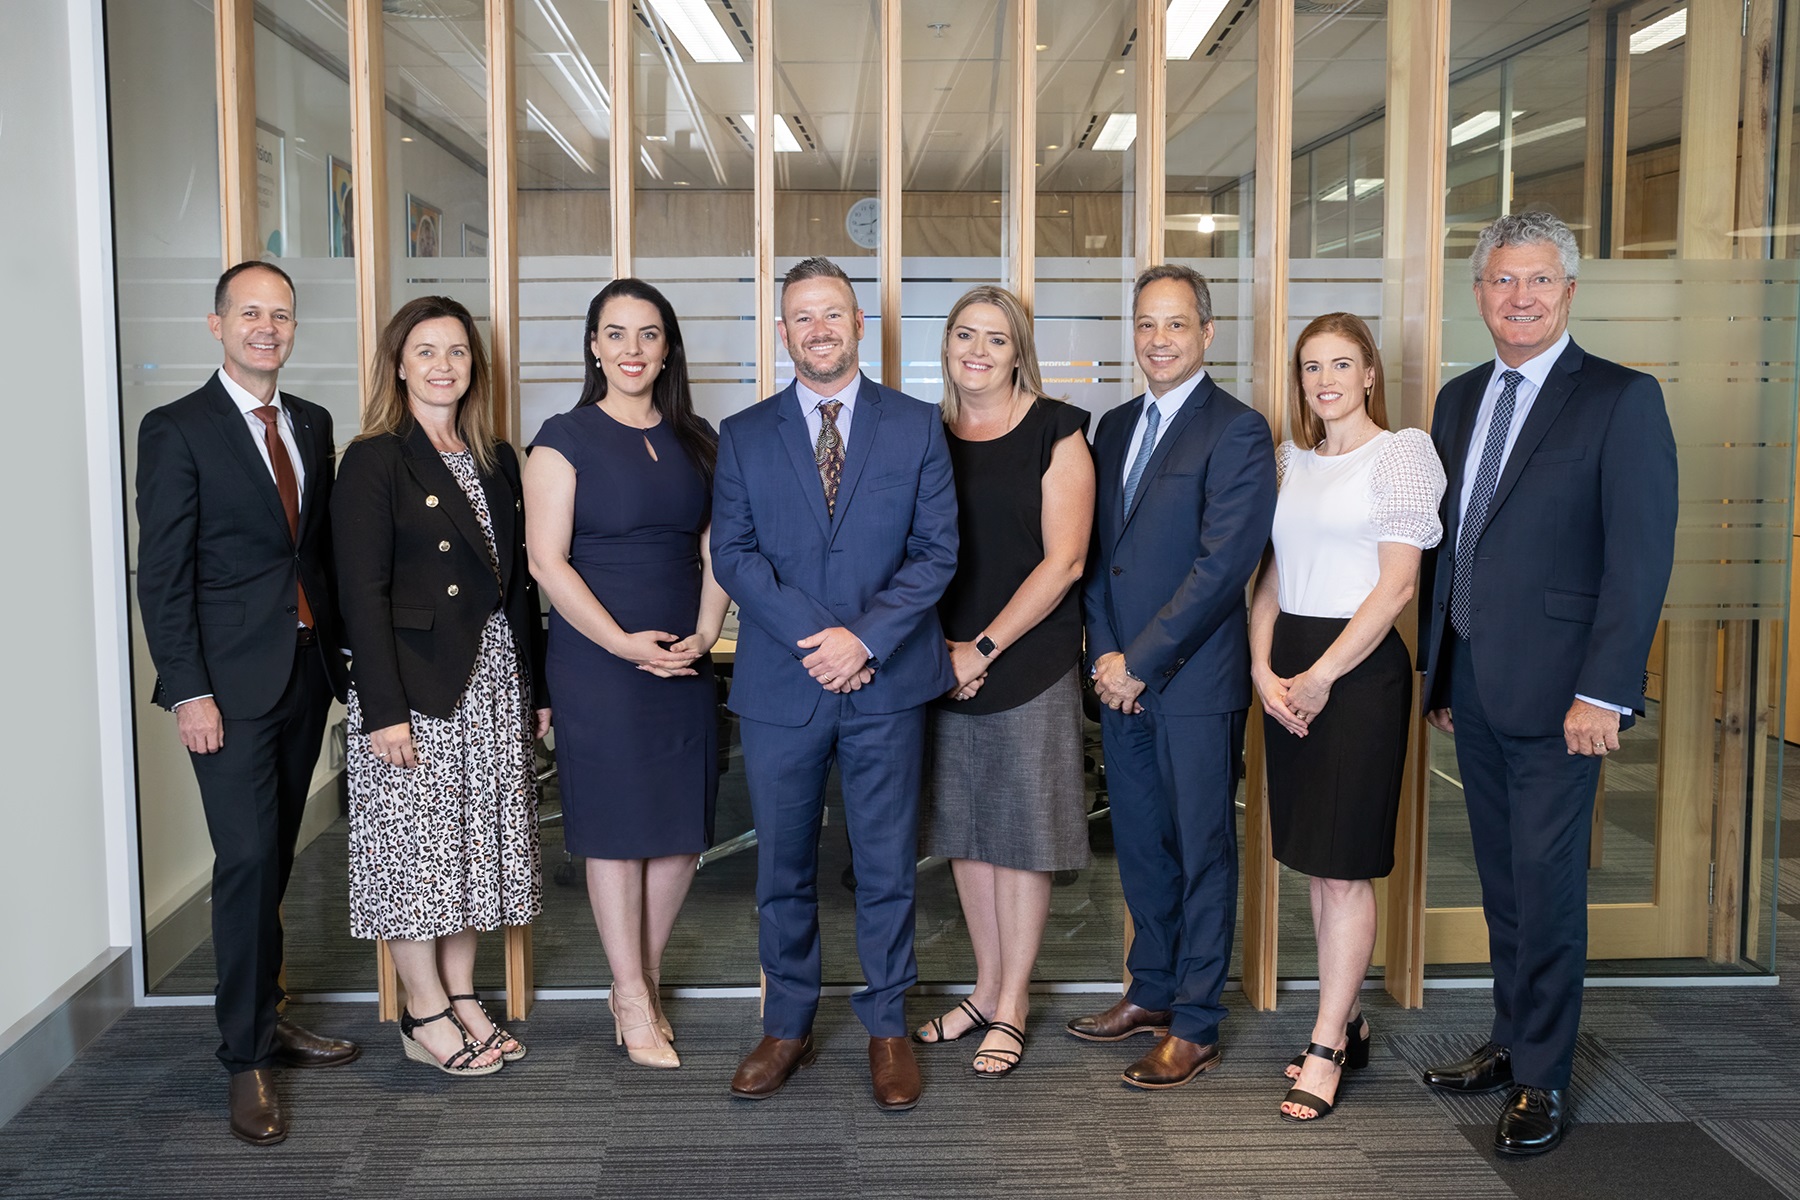 Photo of the SBDC Board (L-R): Grant Cucel, Danelle Cross, Eliza Carbines, Steven Dobson, Gillian Nathan, Anthony Masi, and Cindy Hurst with WA Small Business Commissioner David Eaton.